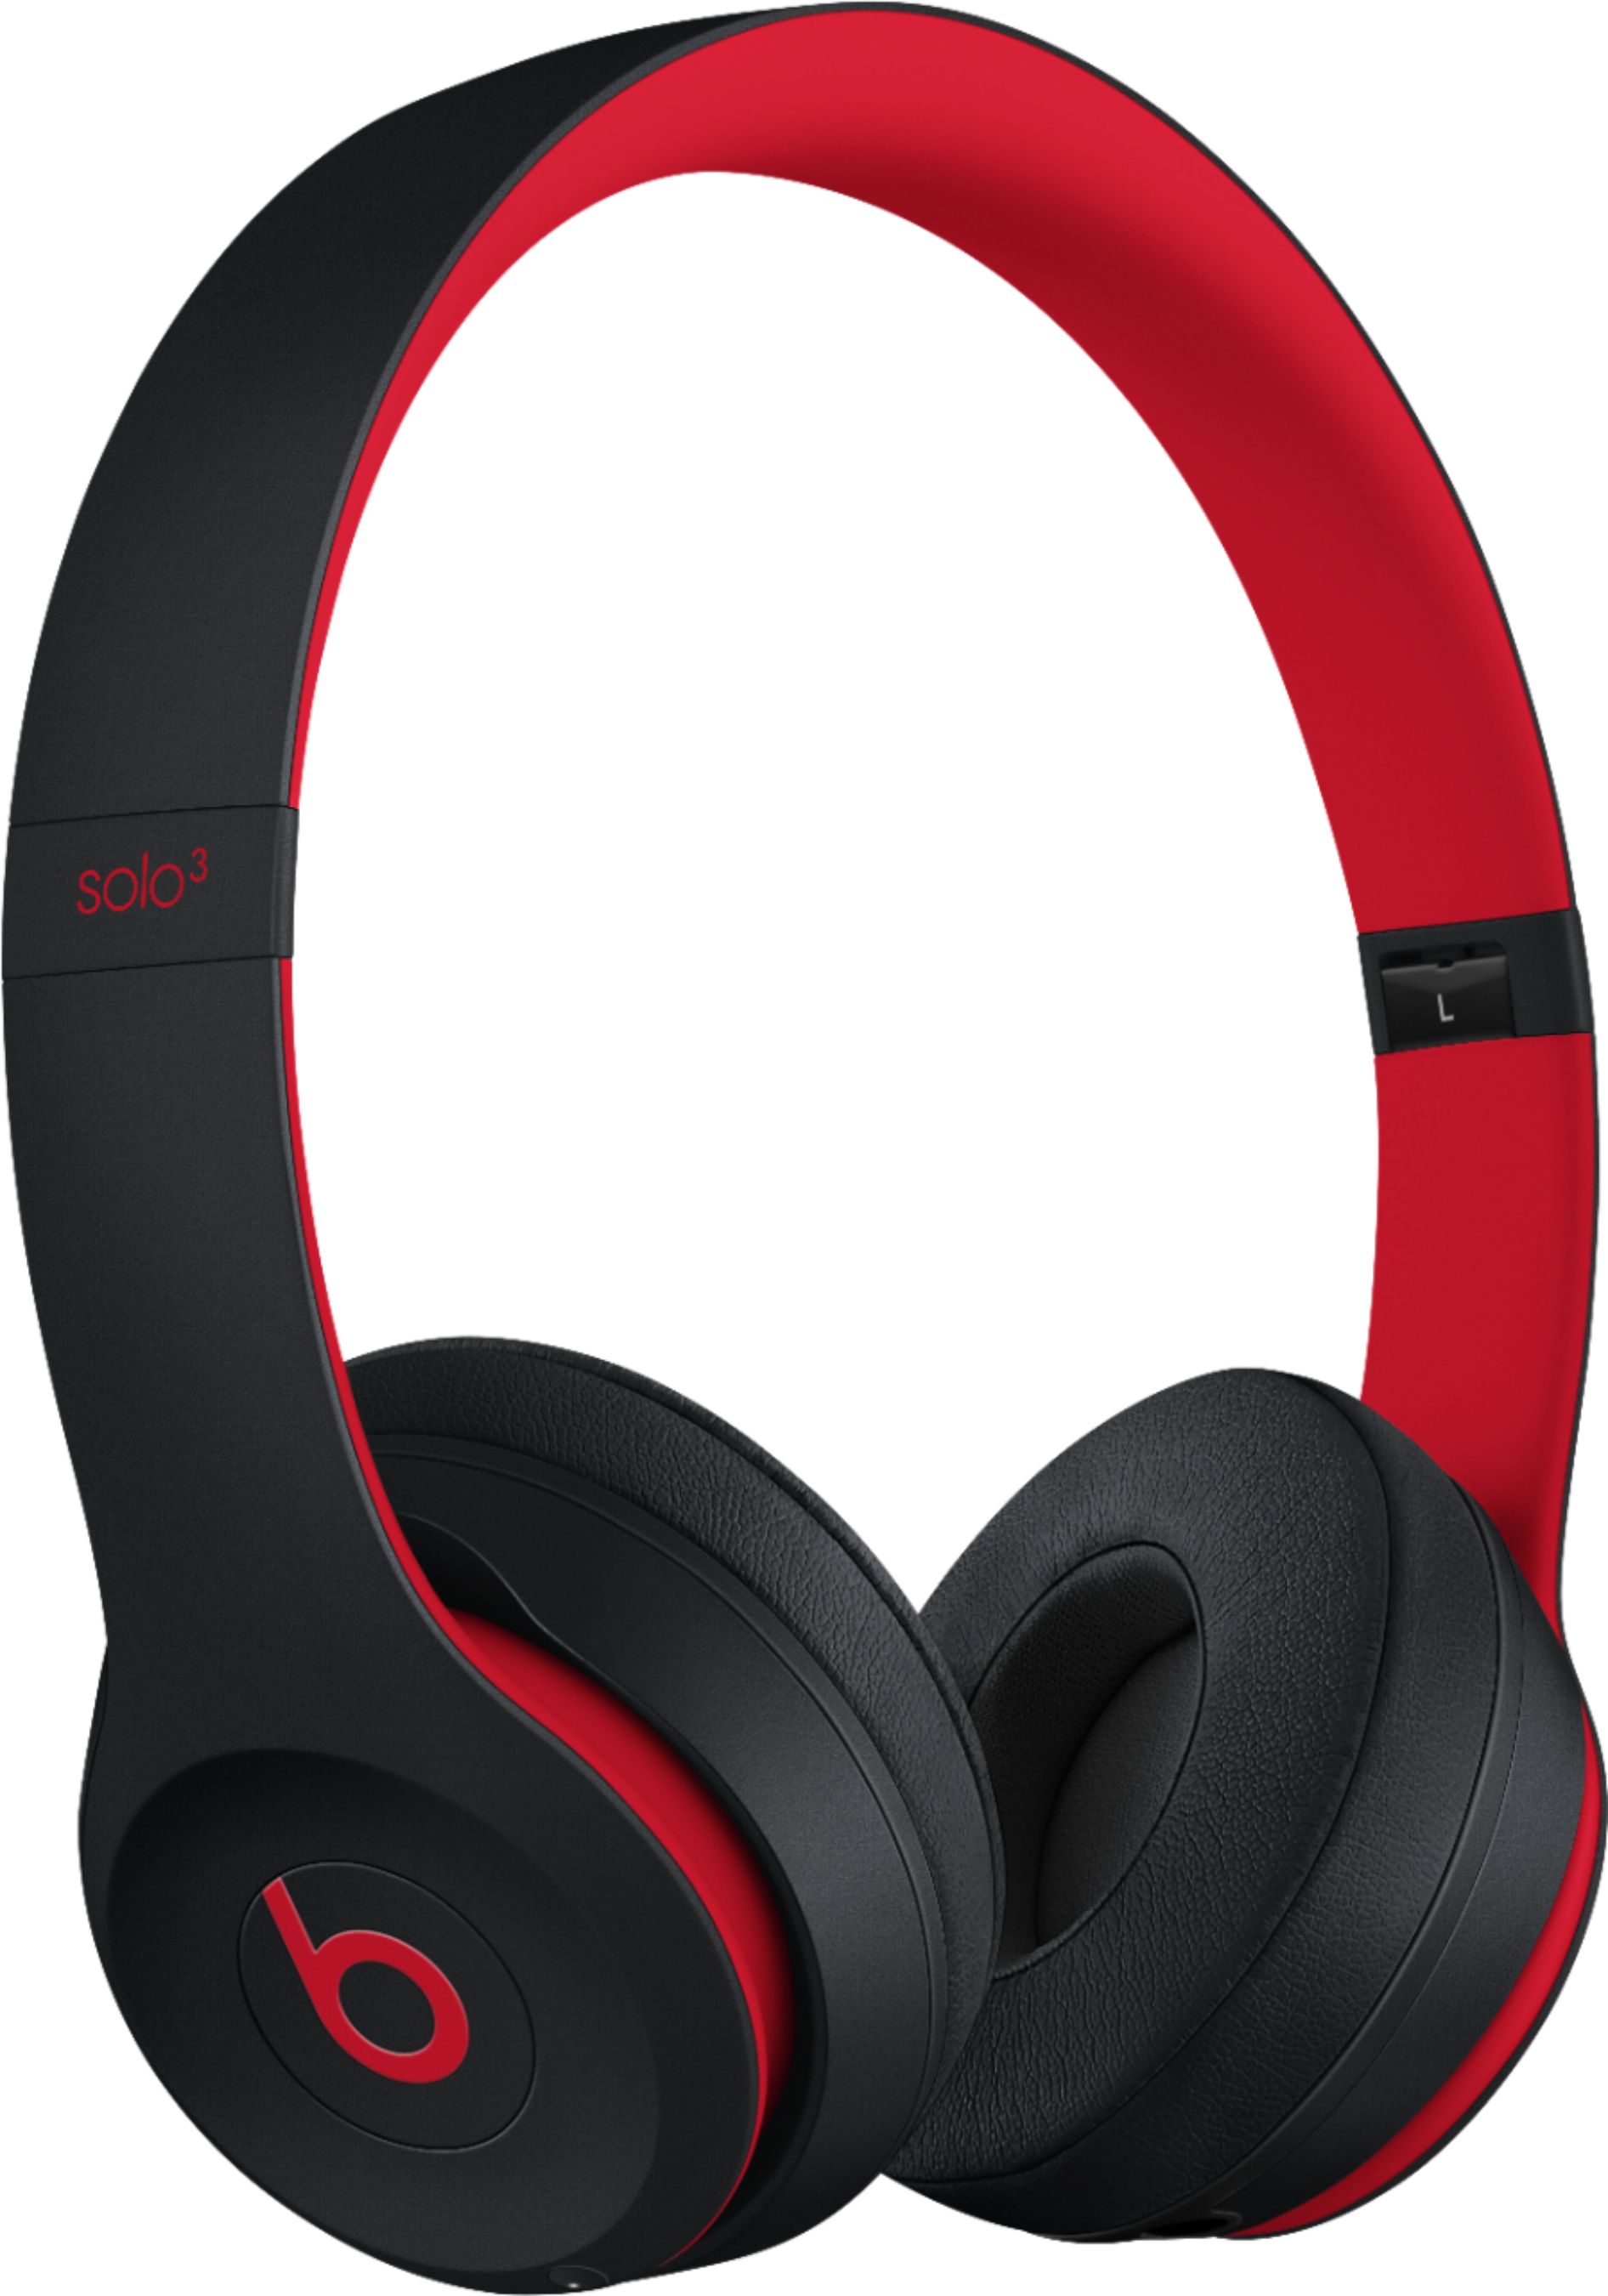 Beats by Dr. Dre Solo3 Wireless Headphones MRQC2LL/A - MRQC2PA/A